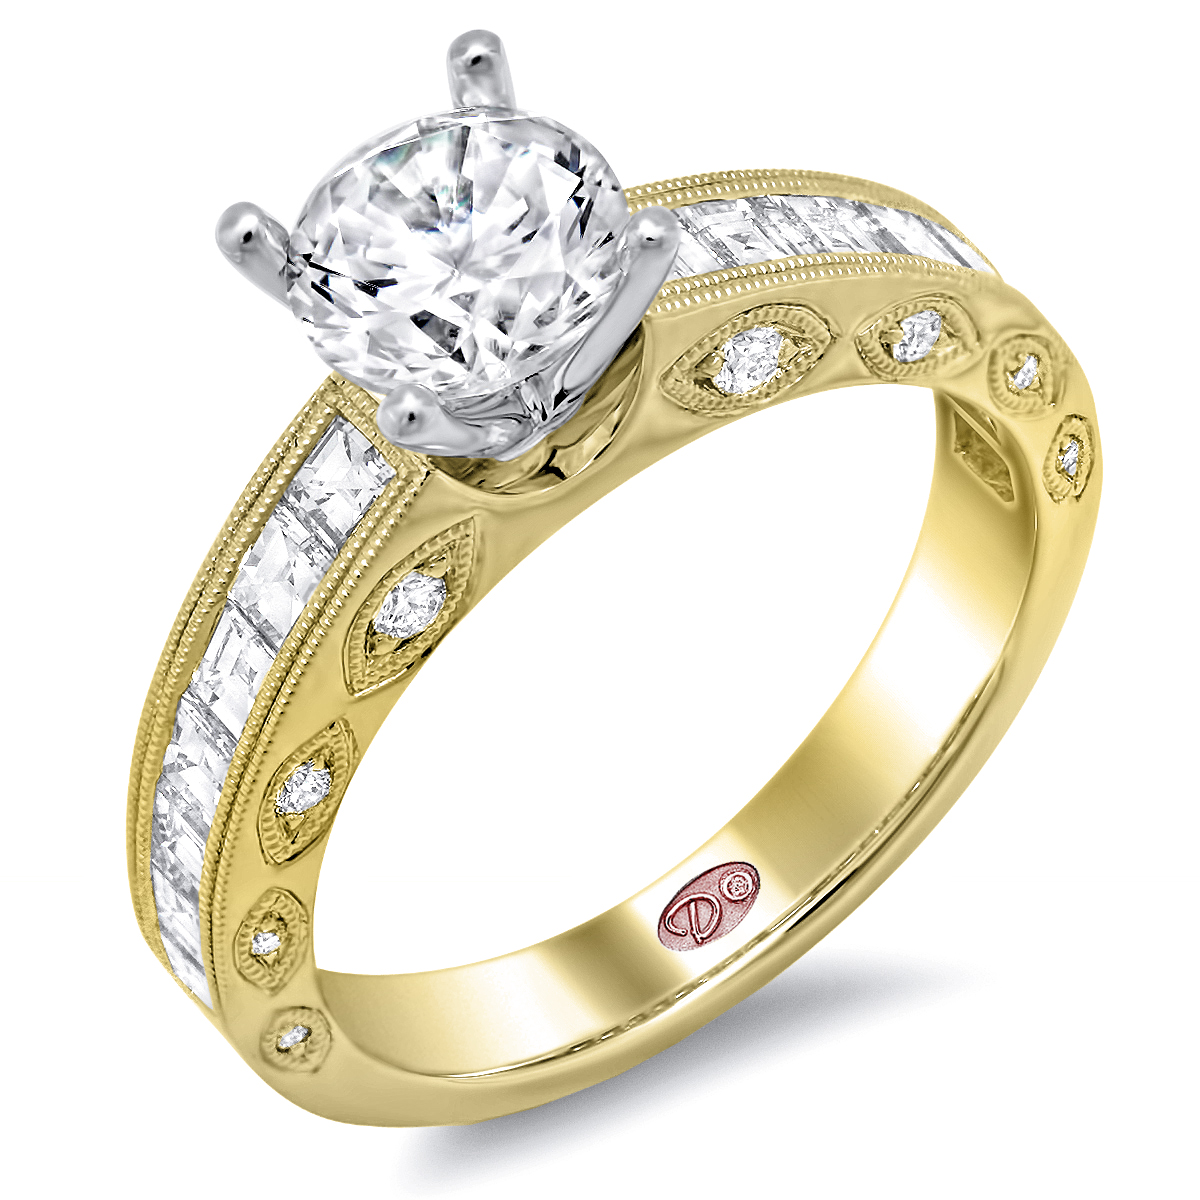 View more Yellow Gold Channel Set Engagement Rings on Demarcoâ€™s ...